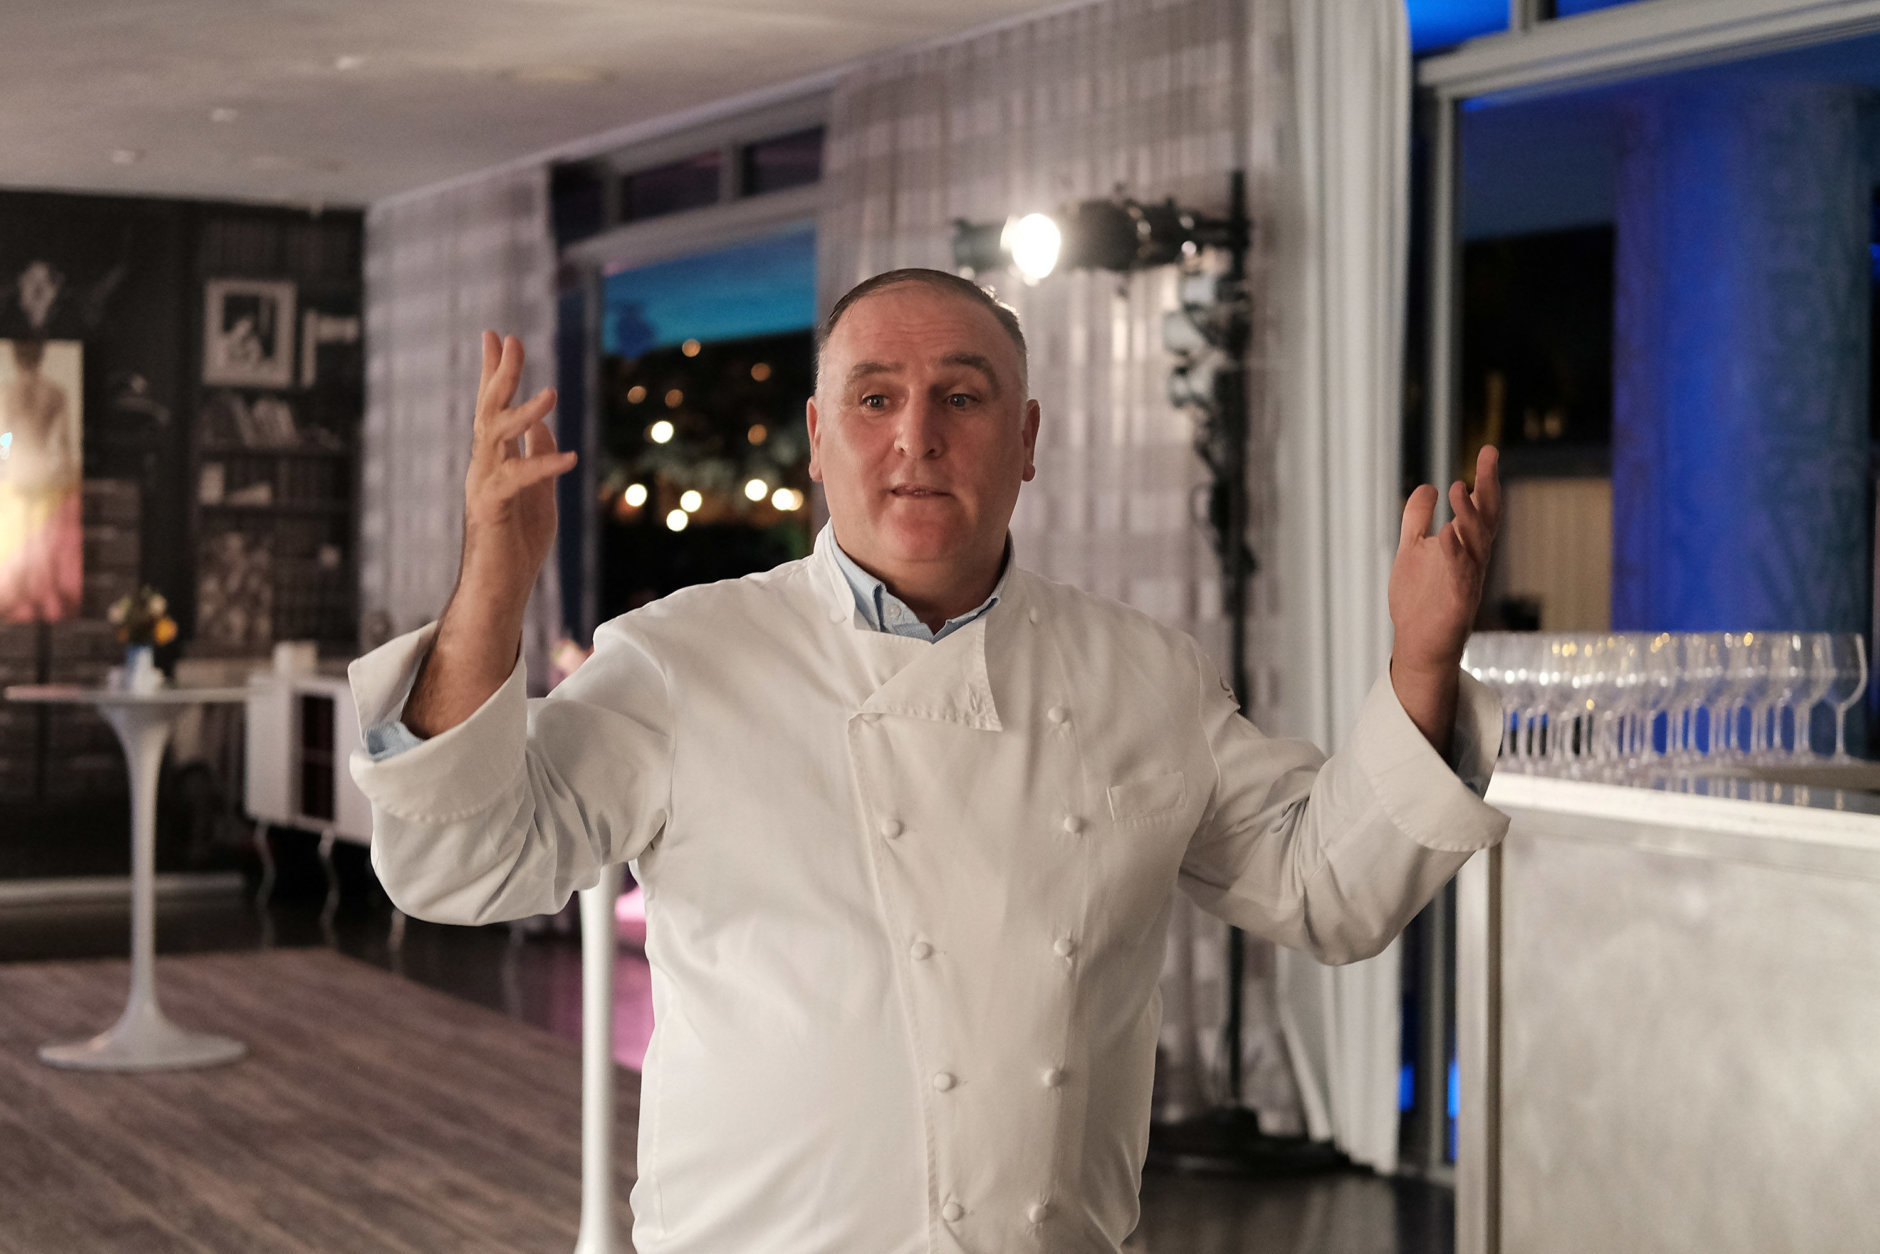 MIAMI, FL - DECEMBER 08:  Jose Andres attends FOOD MEETS ART, hosted by Jose Andres for American Express Platinum Card Members at the SLS South Beach Hotel on December 8, 2017 in Miami, Florida.  (Photo by Jason Kempin/Getty Images for American Express Platinum)